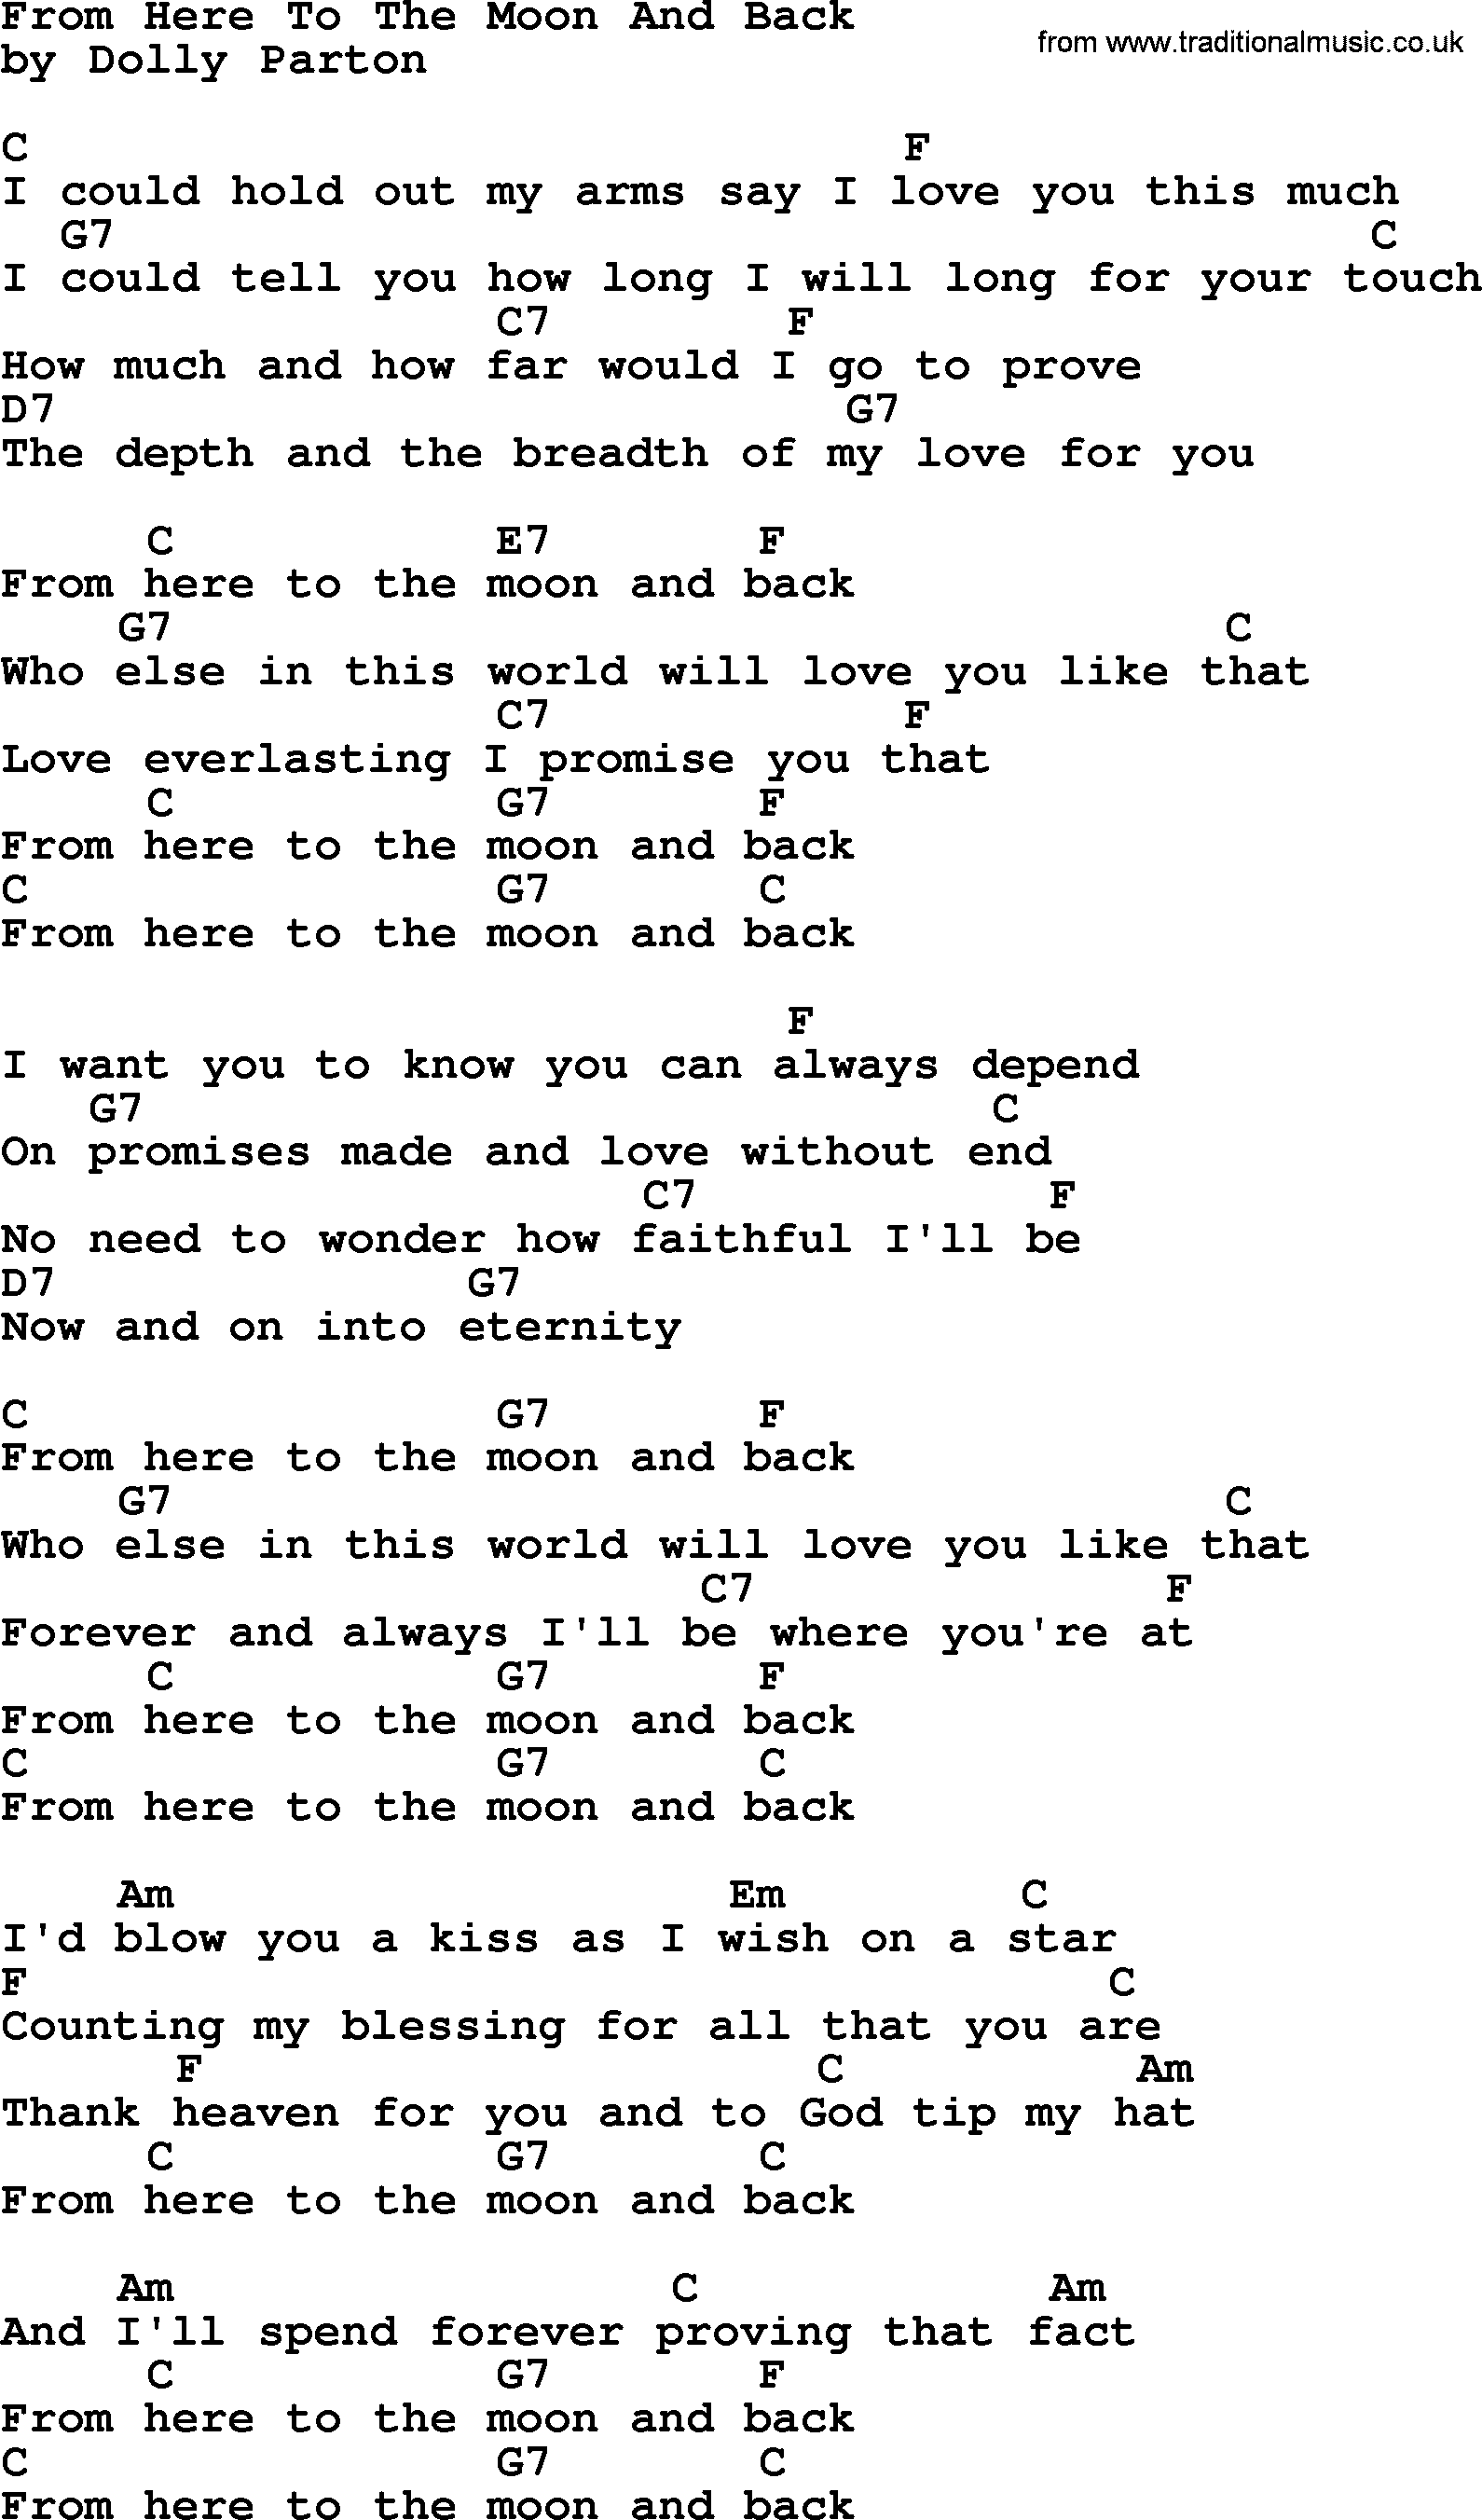 Dolly Parton song From Here To The Moon And Back, lyrics and chords